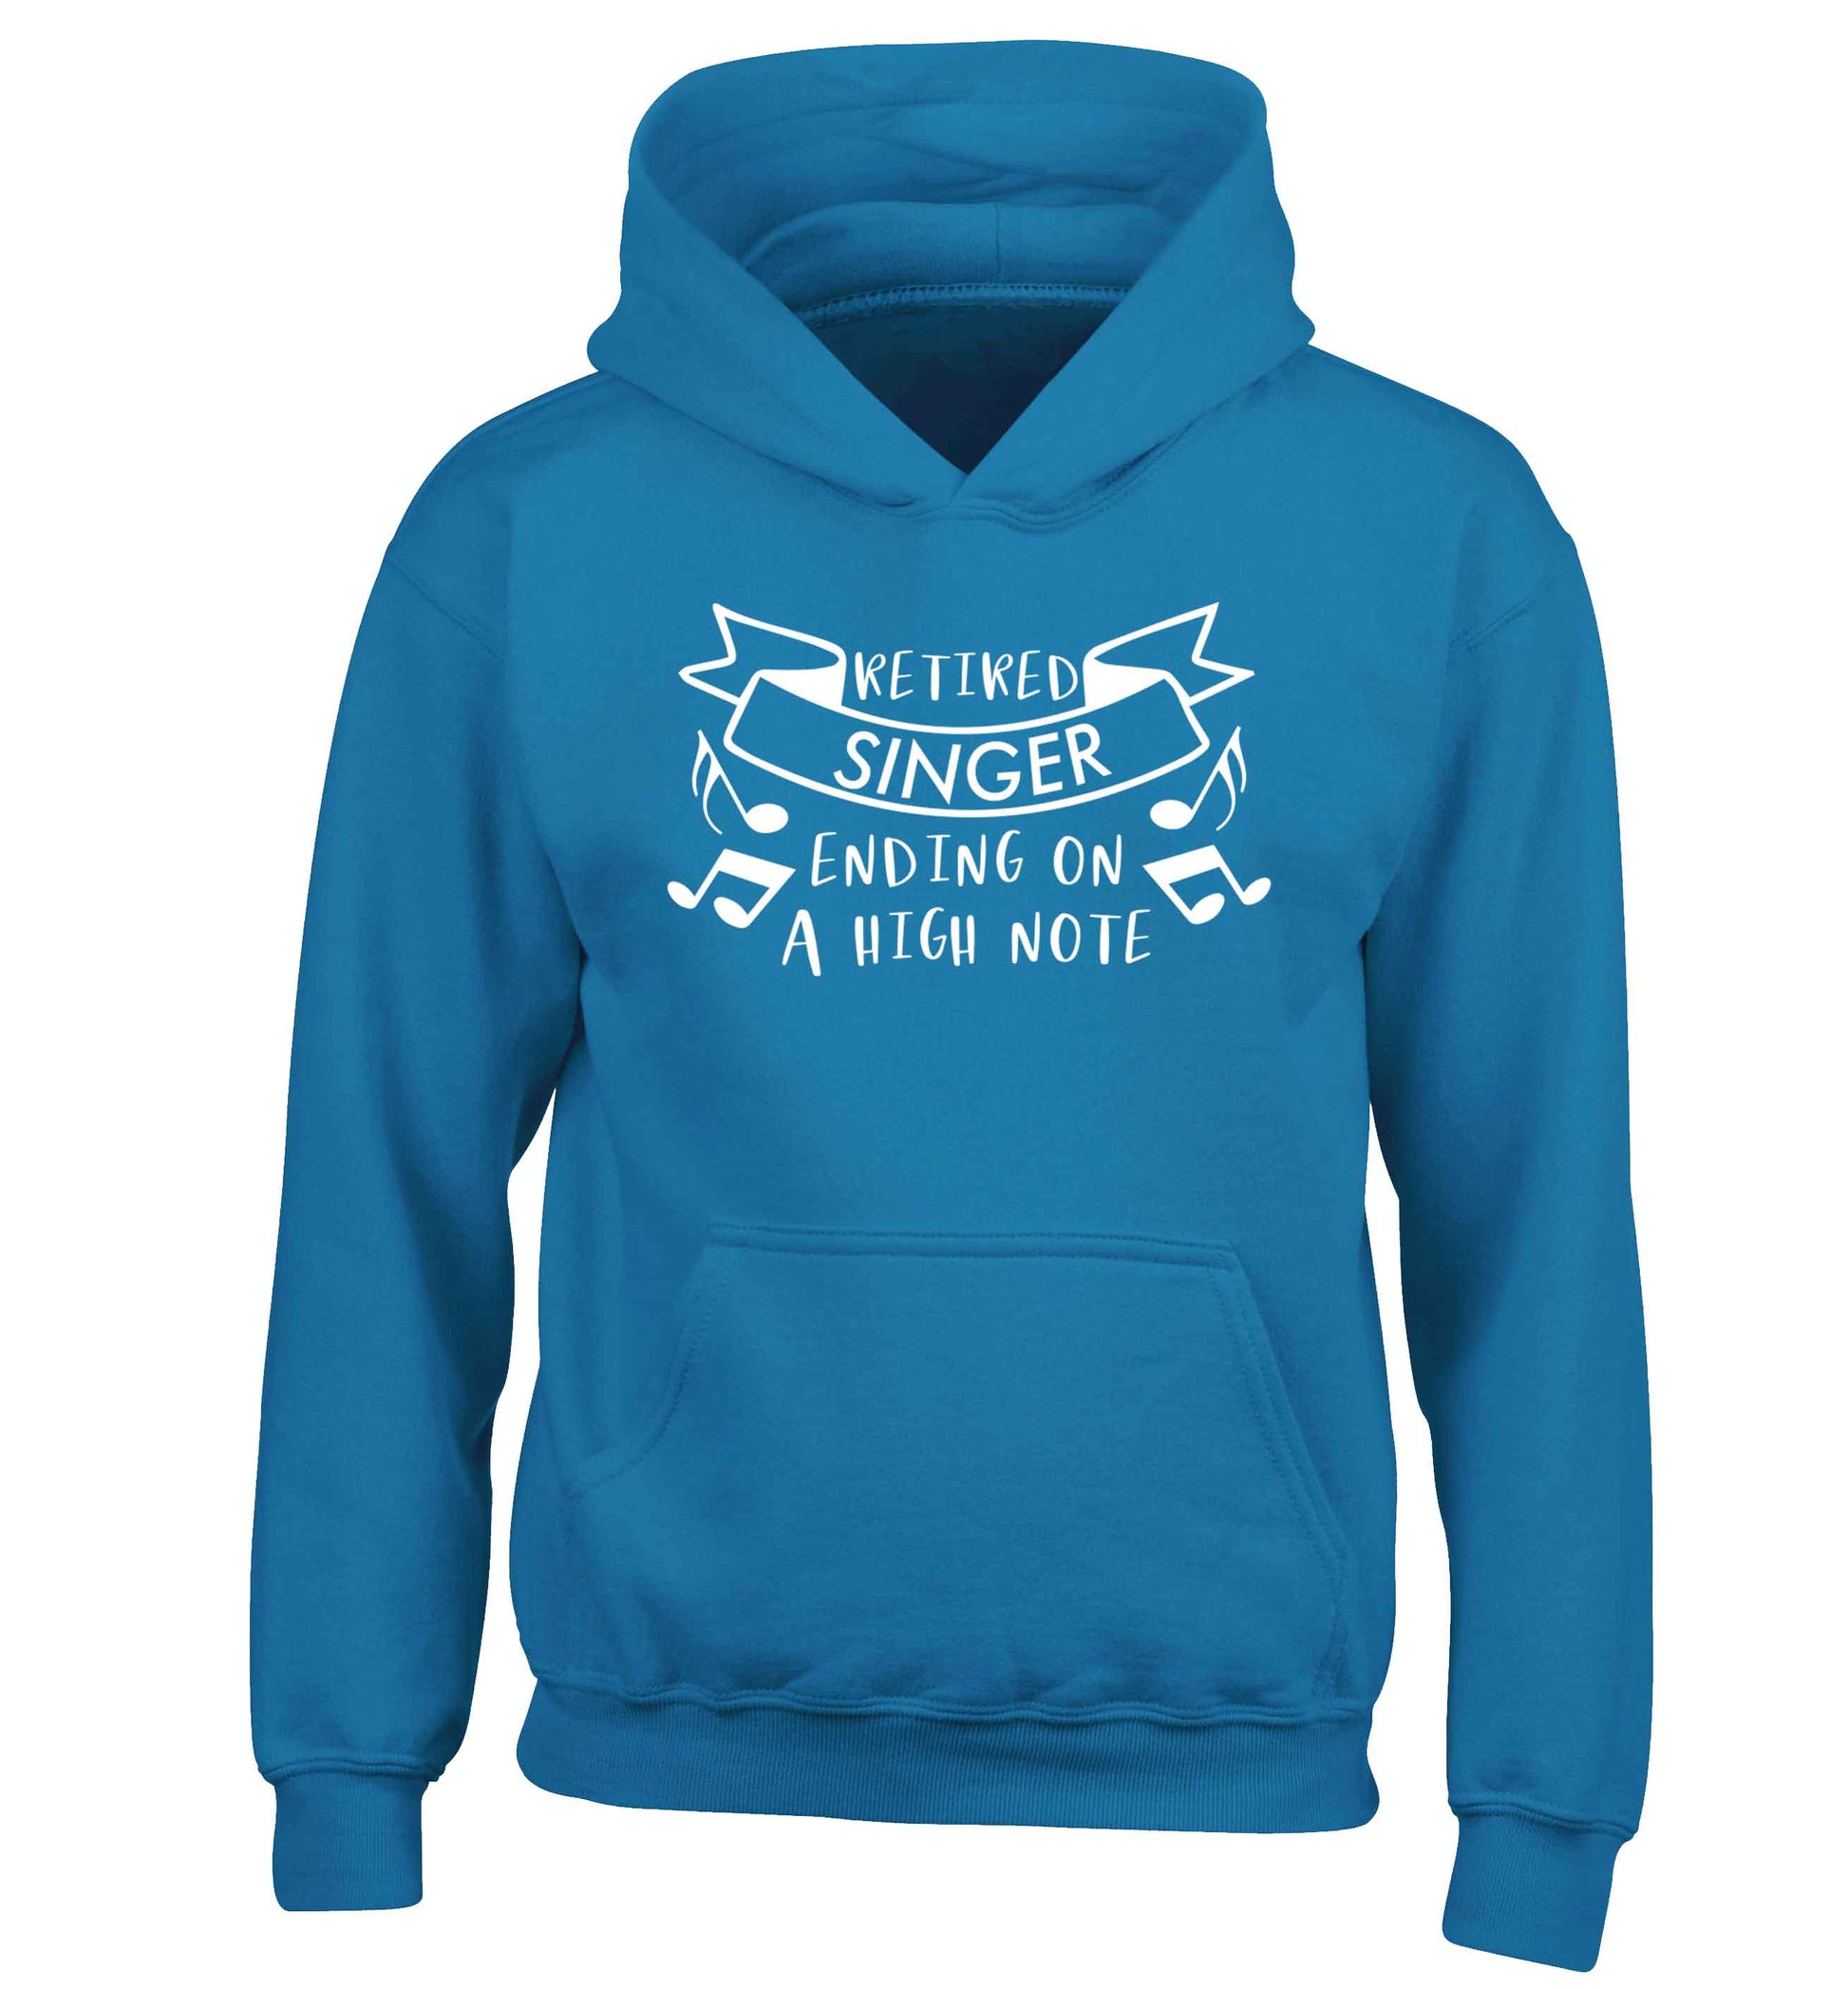 Retired singer ending on a high note children's blue hoodie 12-13 Years